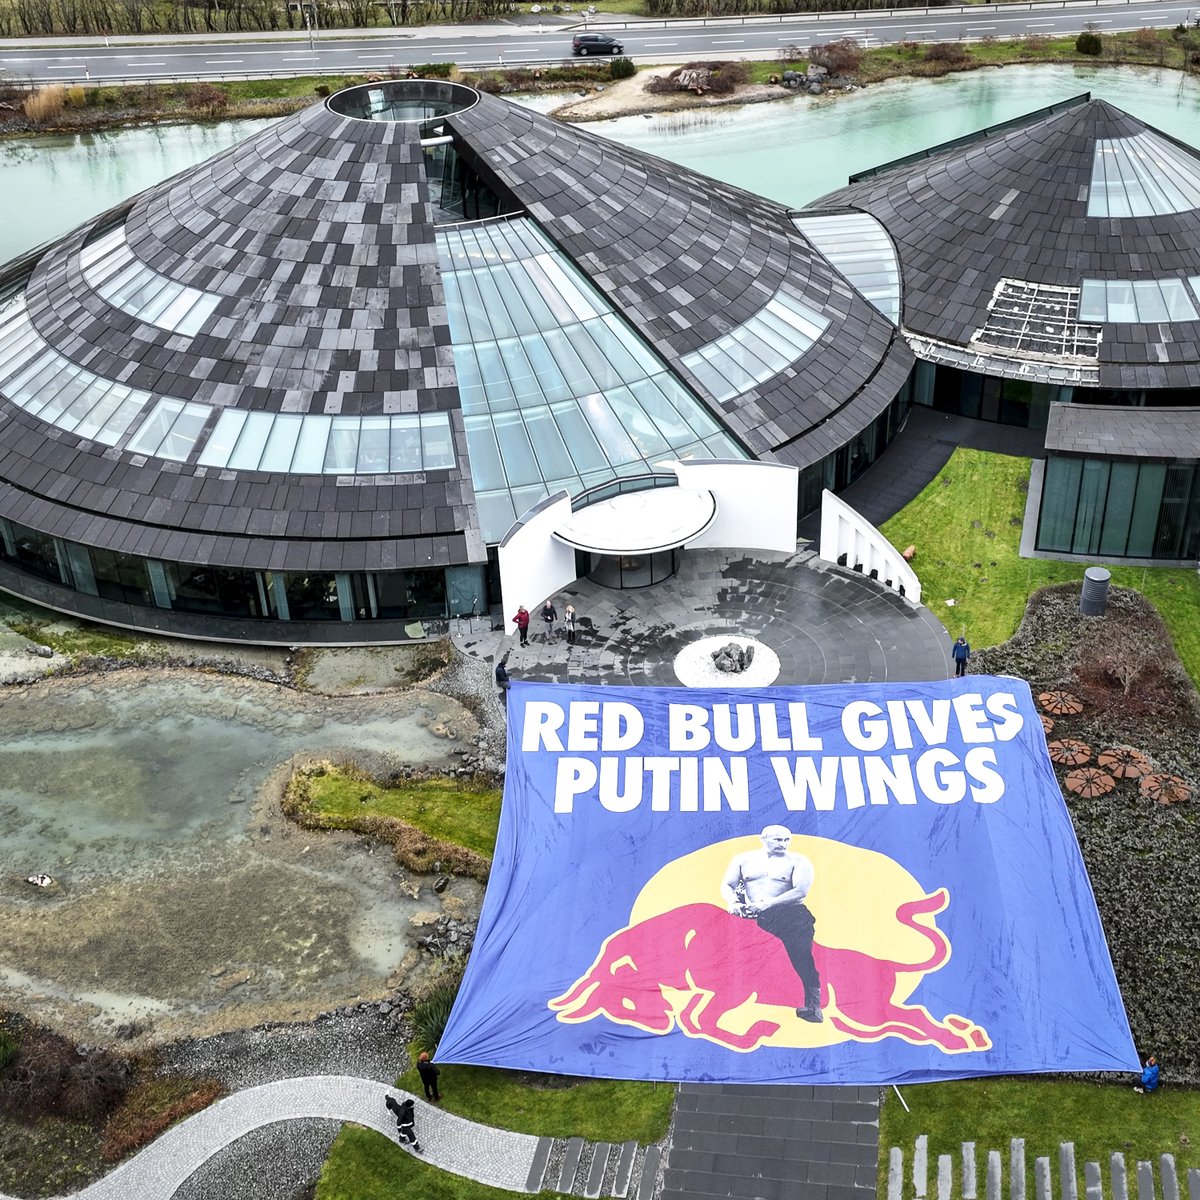 BREAKING: @RedBull doesn’t want anyone talking about how they’re still operating in Putin’s Russia (other companies like Pepsi and Coca-Cola have pulled their drinks). So we came to their HQ in Austria to launch a new, honest Red Bull advertising campaign for them 😉